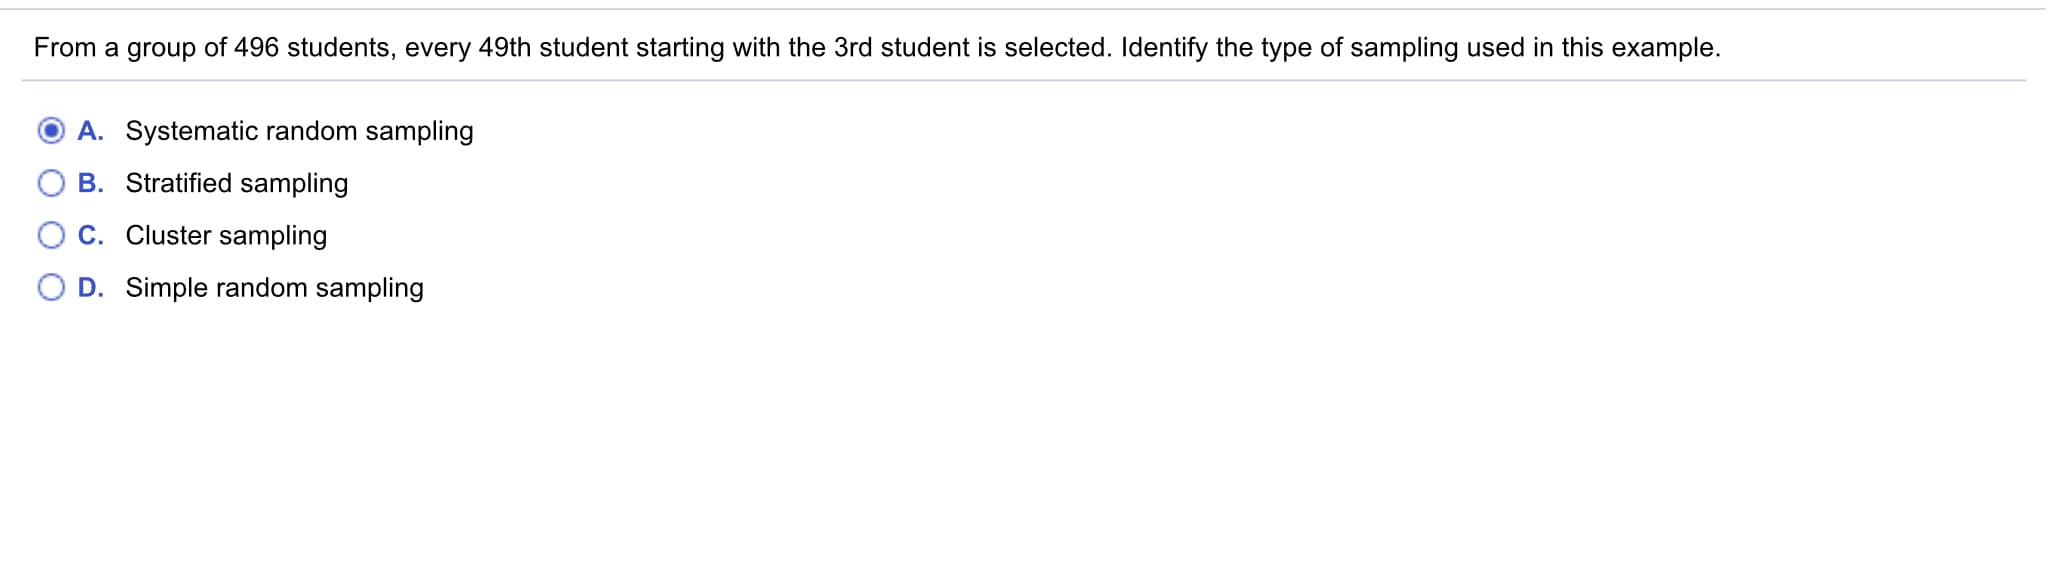 From a group of 496 students, every 49th student starting with the 3rd student is selected. Identify the type of sampling used in this example.
A. Systematic random sampling
B. Stratified sampling
C. Cluster sampling
D. Simple random sampling
